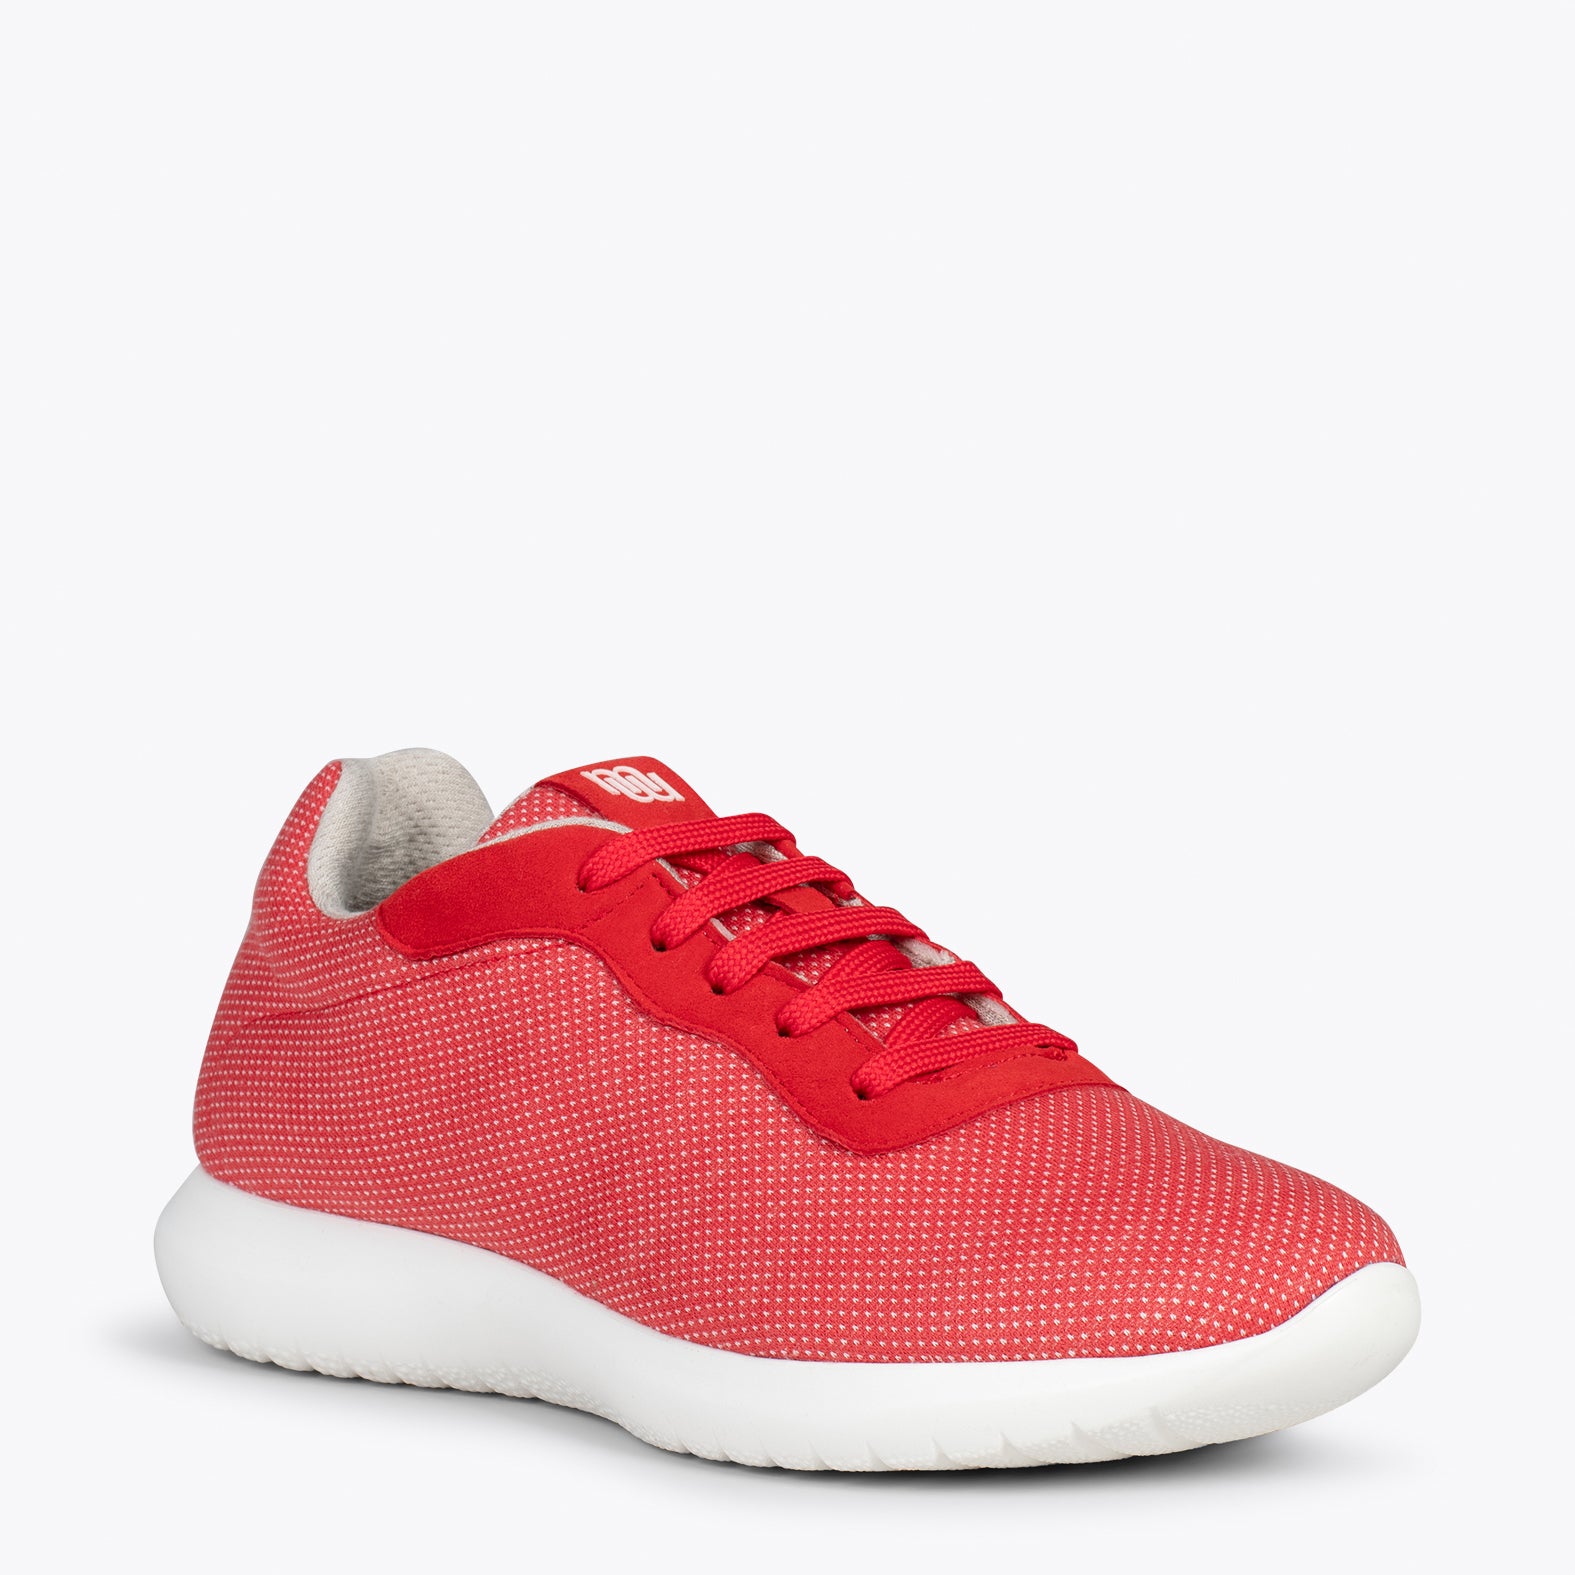 YOGA – RED sneakers crafted in merino wool